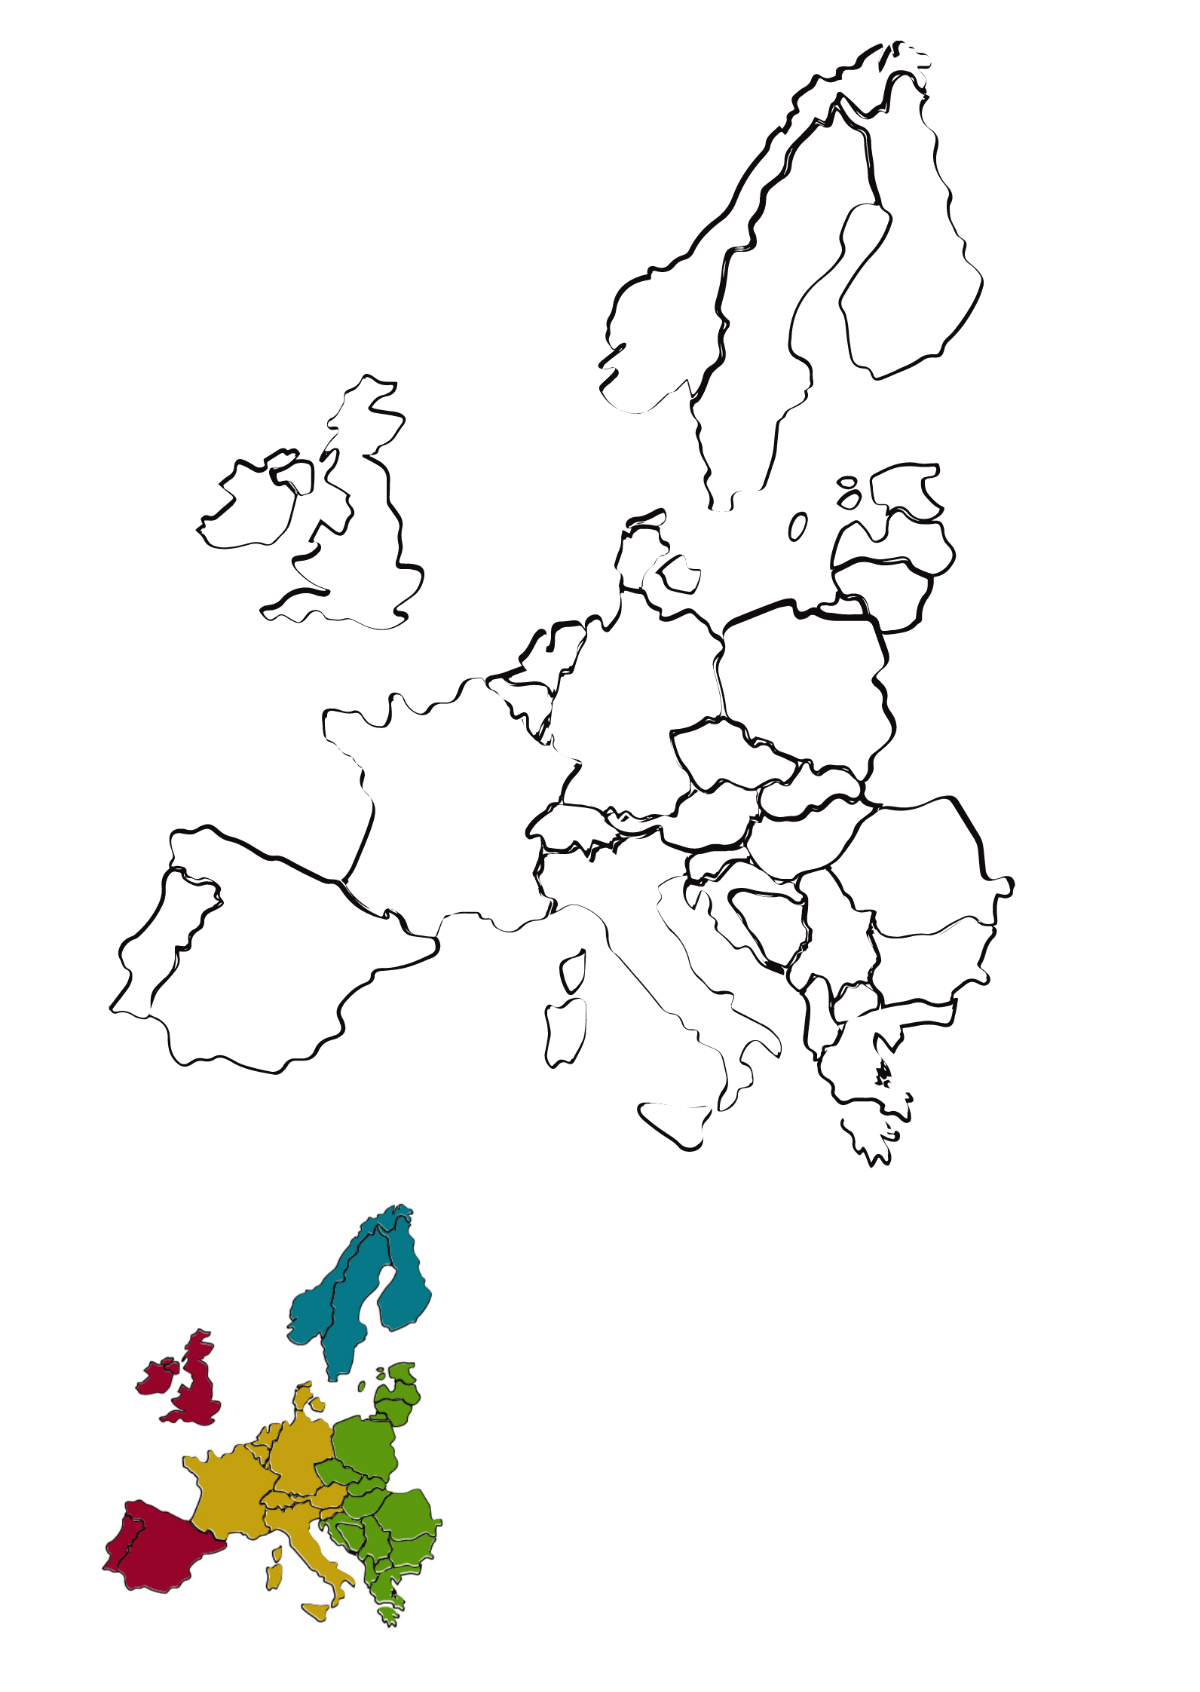 Free Colorful Europe Map Coloring Page Template